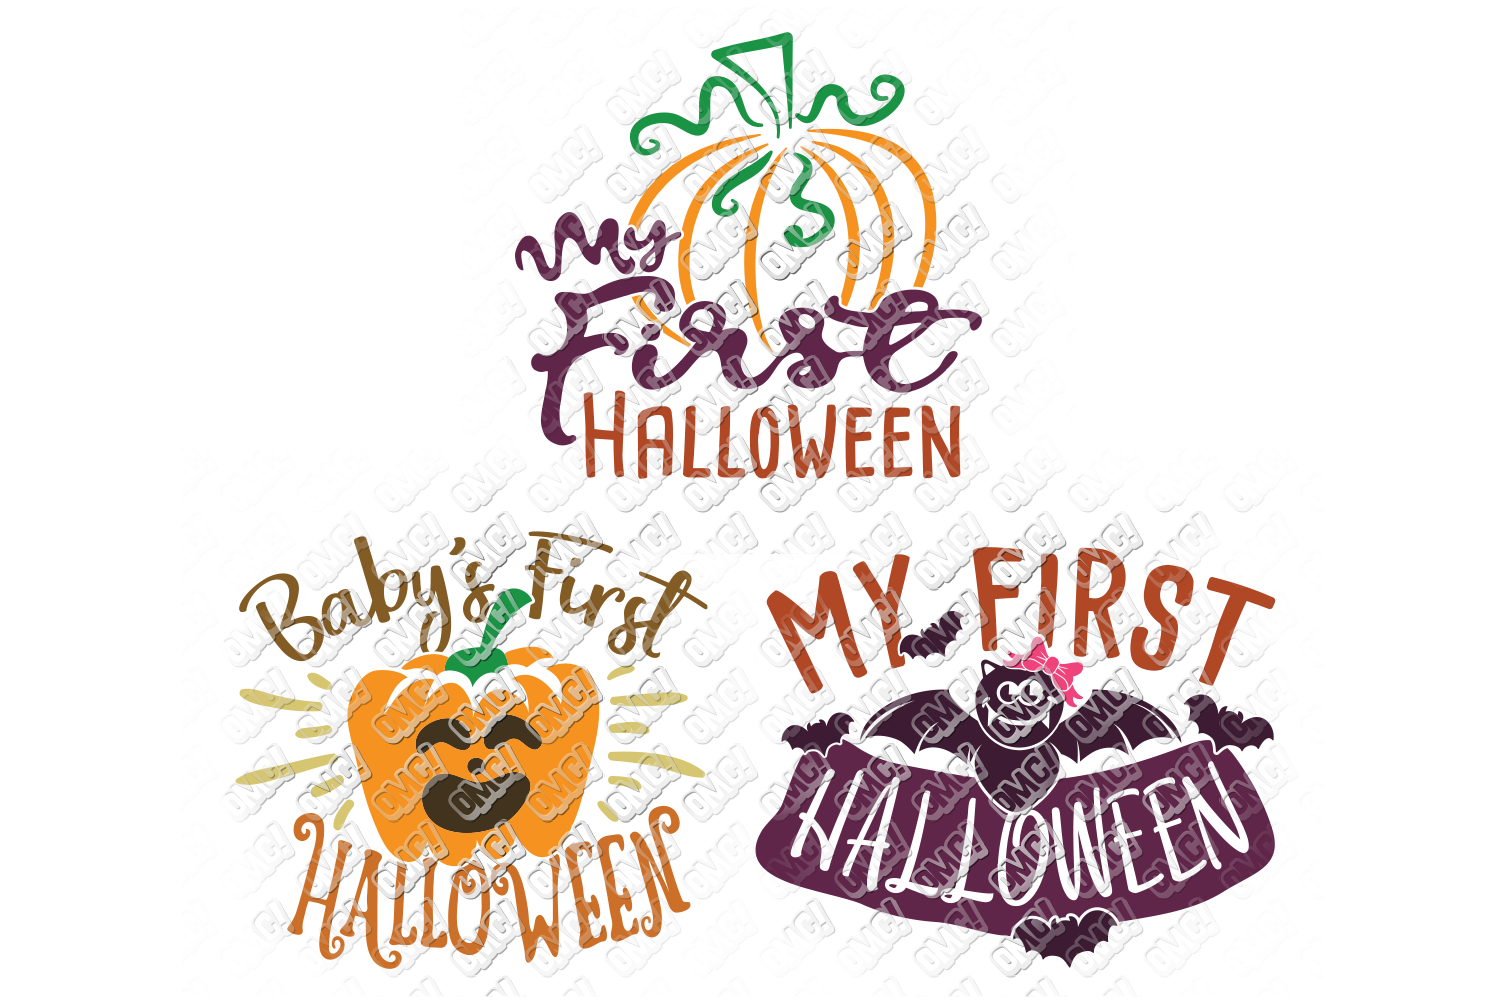 Download My First Halloween SVG in SVG, DXF, PNG, EPS, JPEG